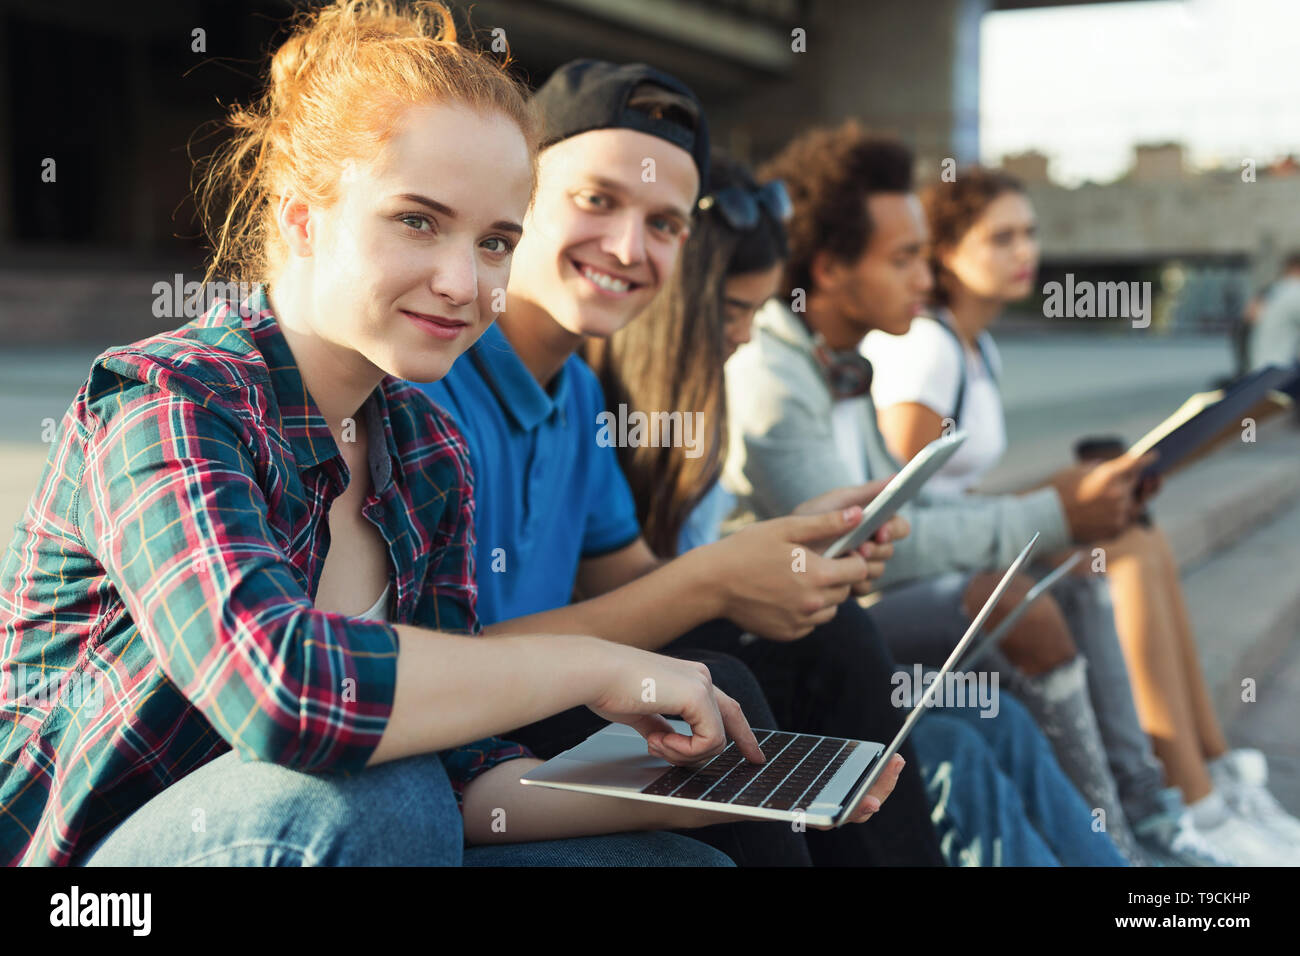 Cute redhead girl using laptop, studying with her teen friends Stock Photo